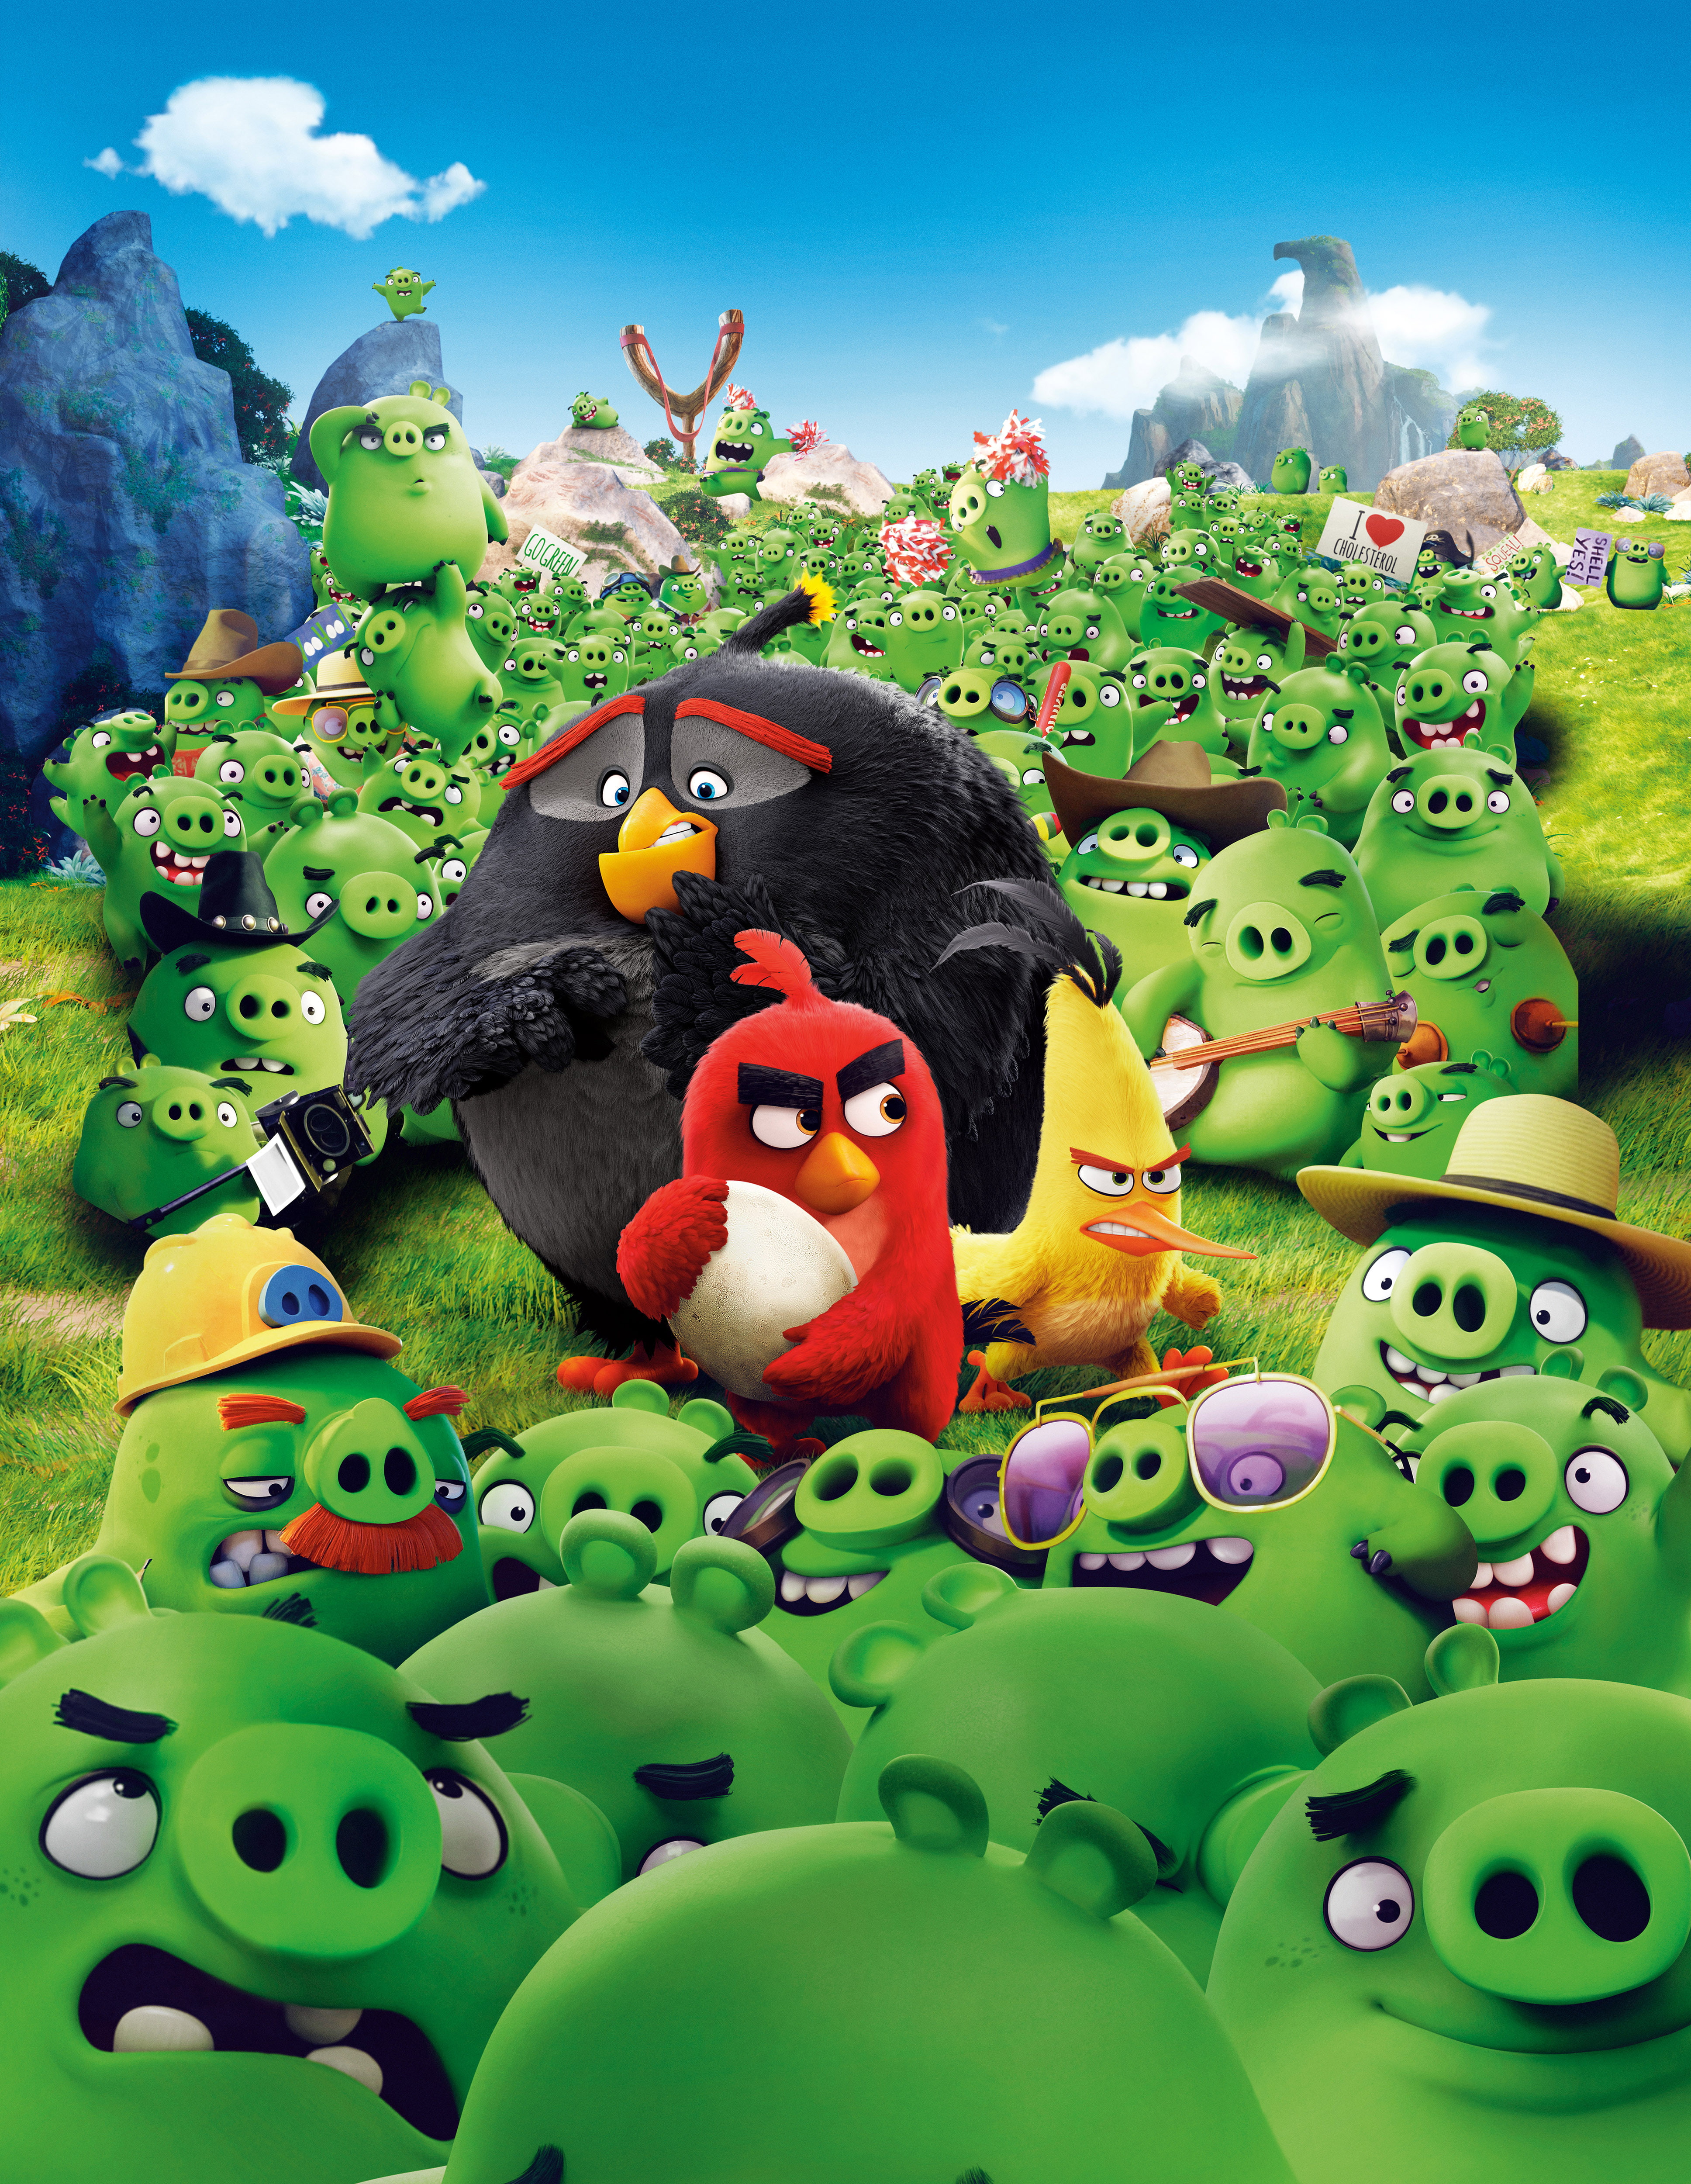 Red, Angry Birds, Bomb, 2016 Movies, Chuck